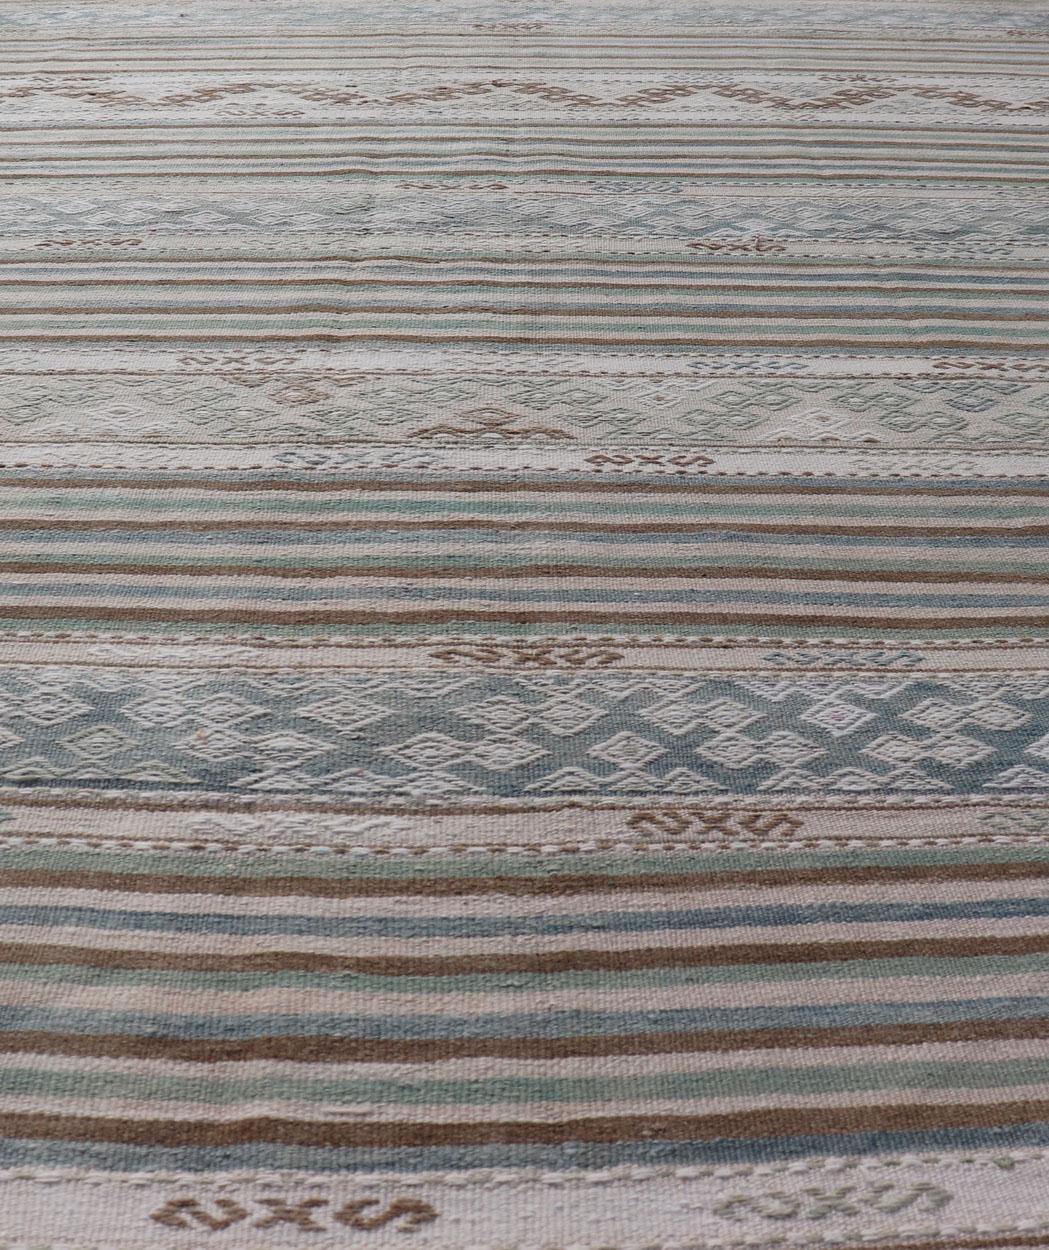 Turkish Flat-Weave Kilim with Stripes and Embroideries In Blue, Green, and Cream For Sale 3